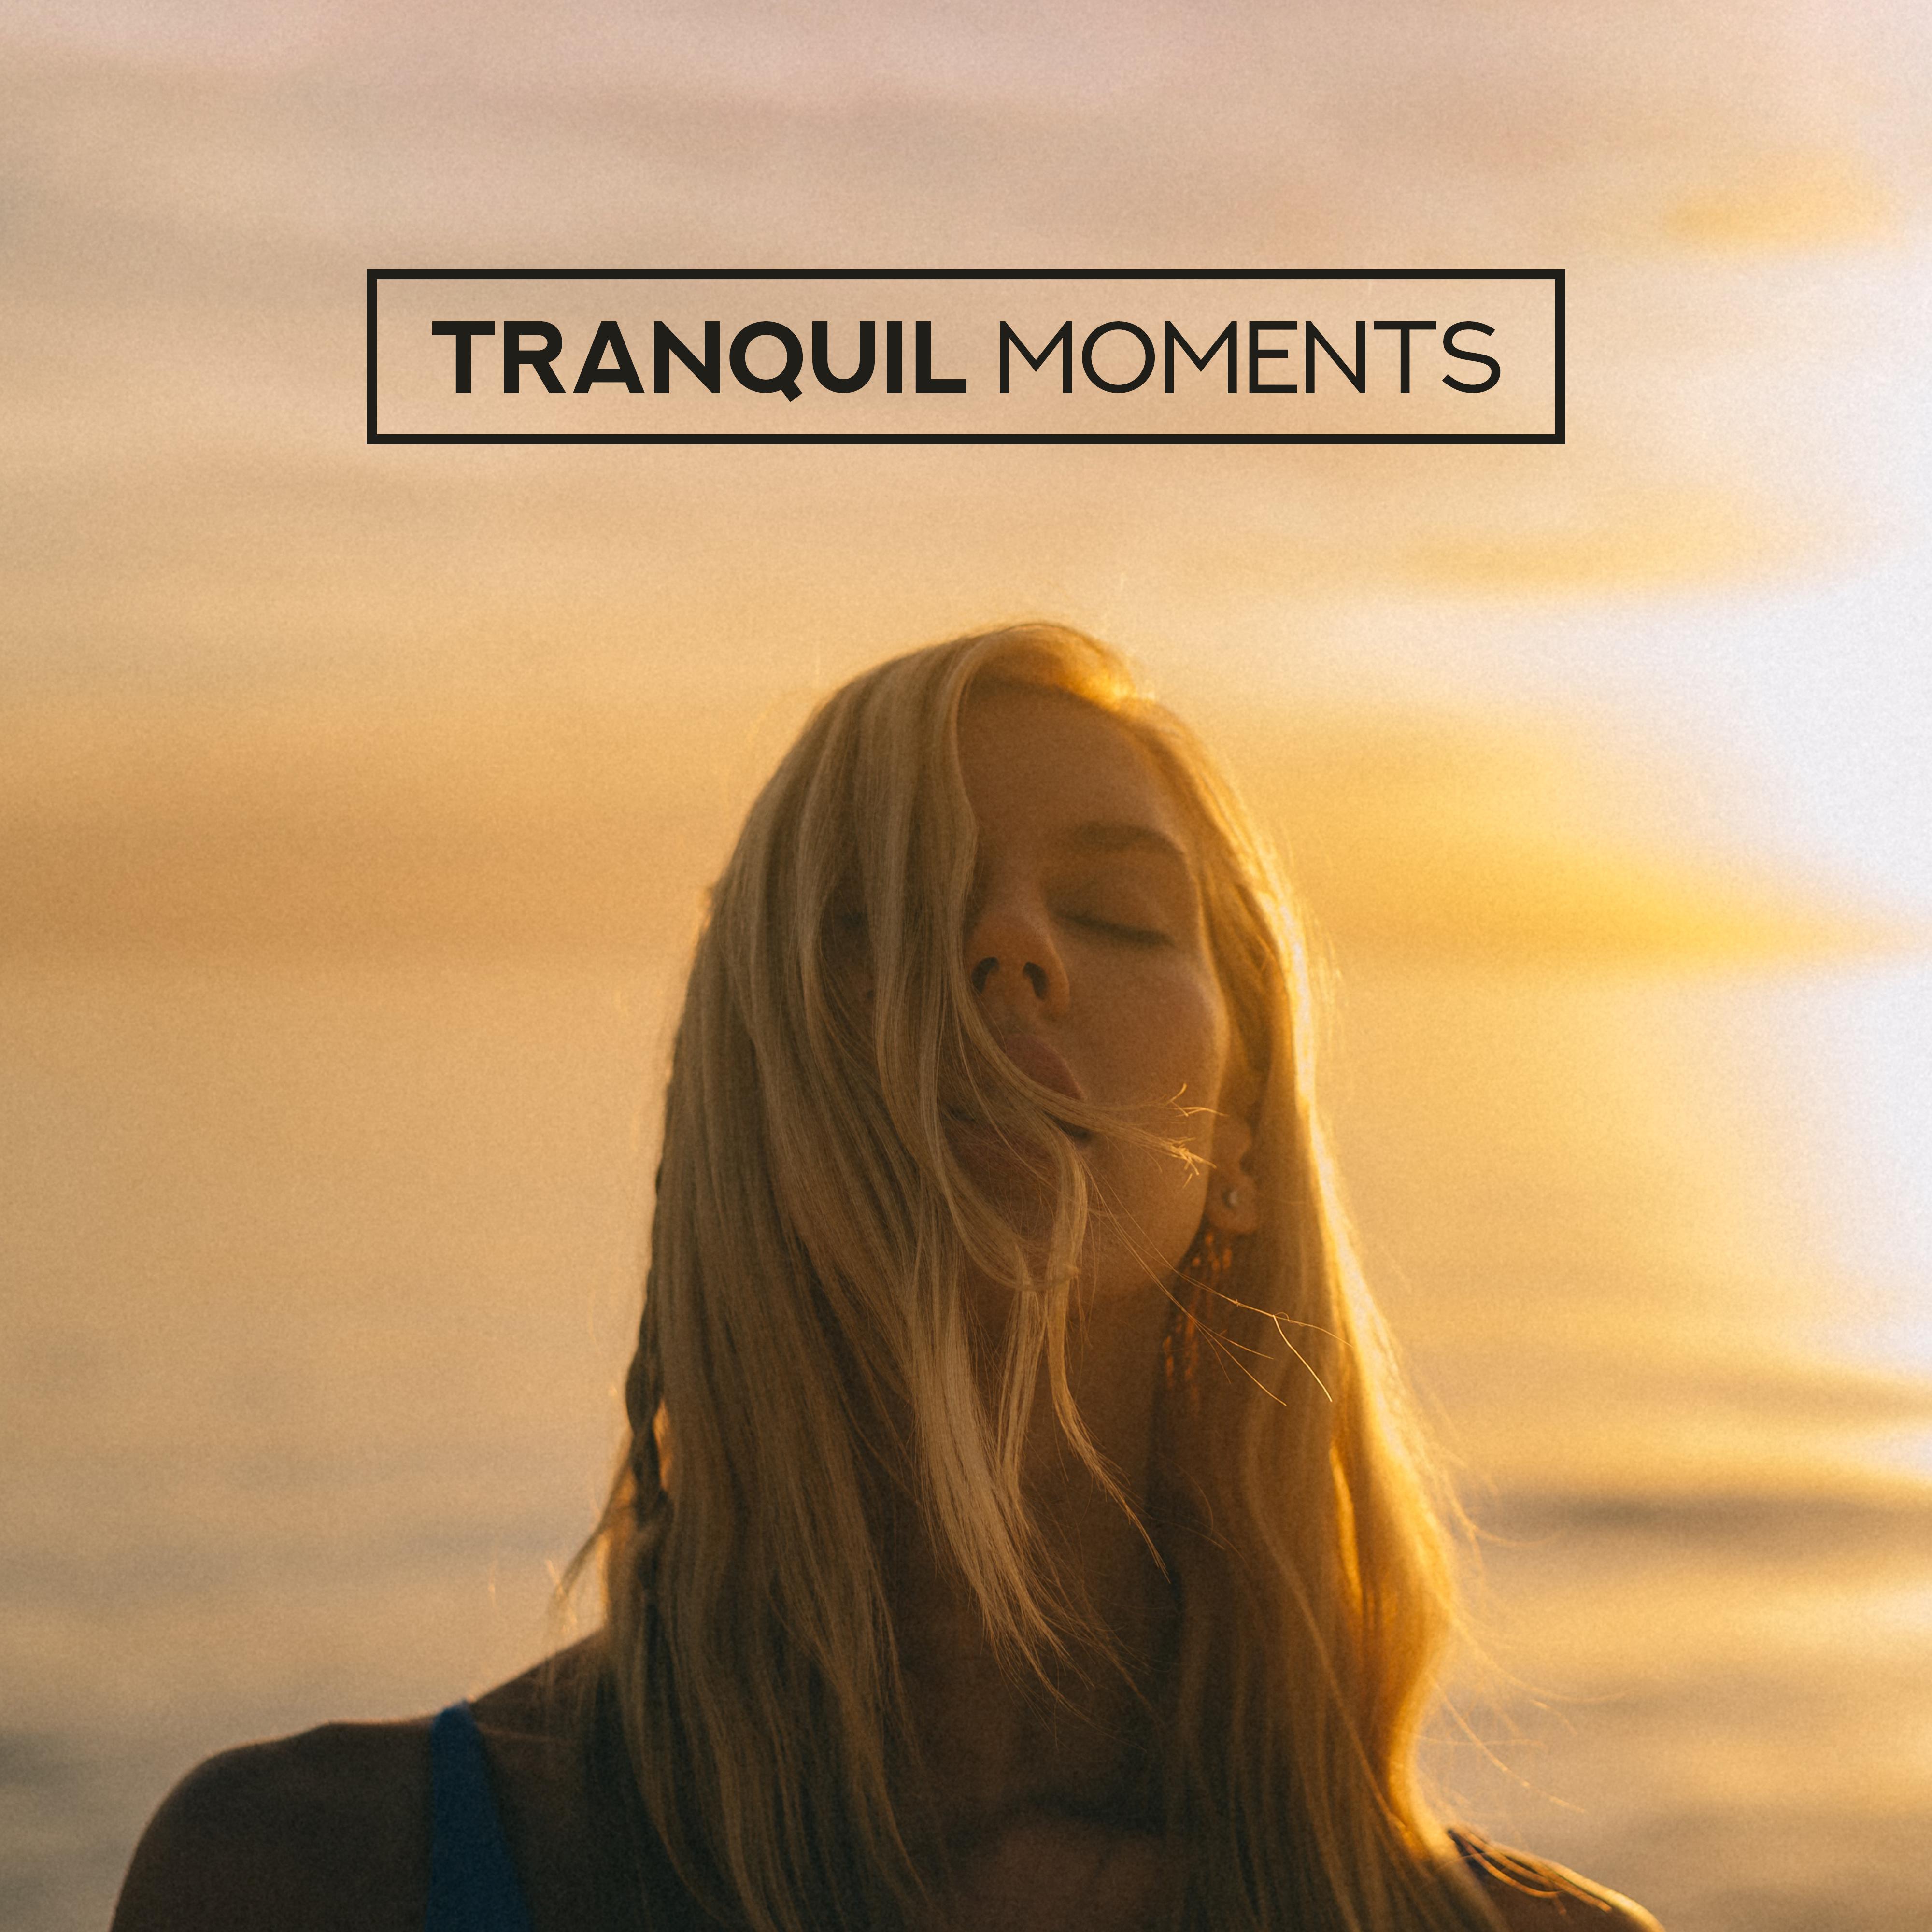 Tranquil Moments: Calm, Quiet and Peaceful Melodies that’ll bring You into a Blissful State of Peace and Balance, Free from Stress, Tension, Anger, Negative Emotions and Unnecessary Thoughts